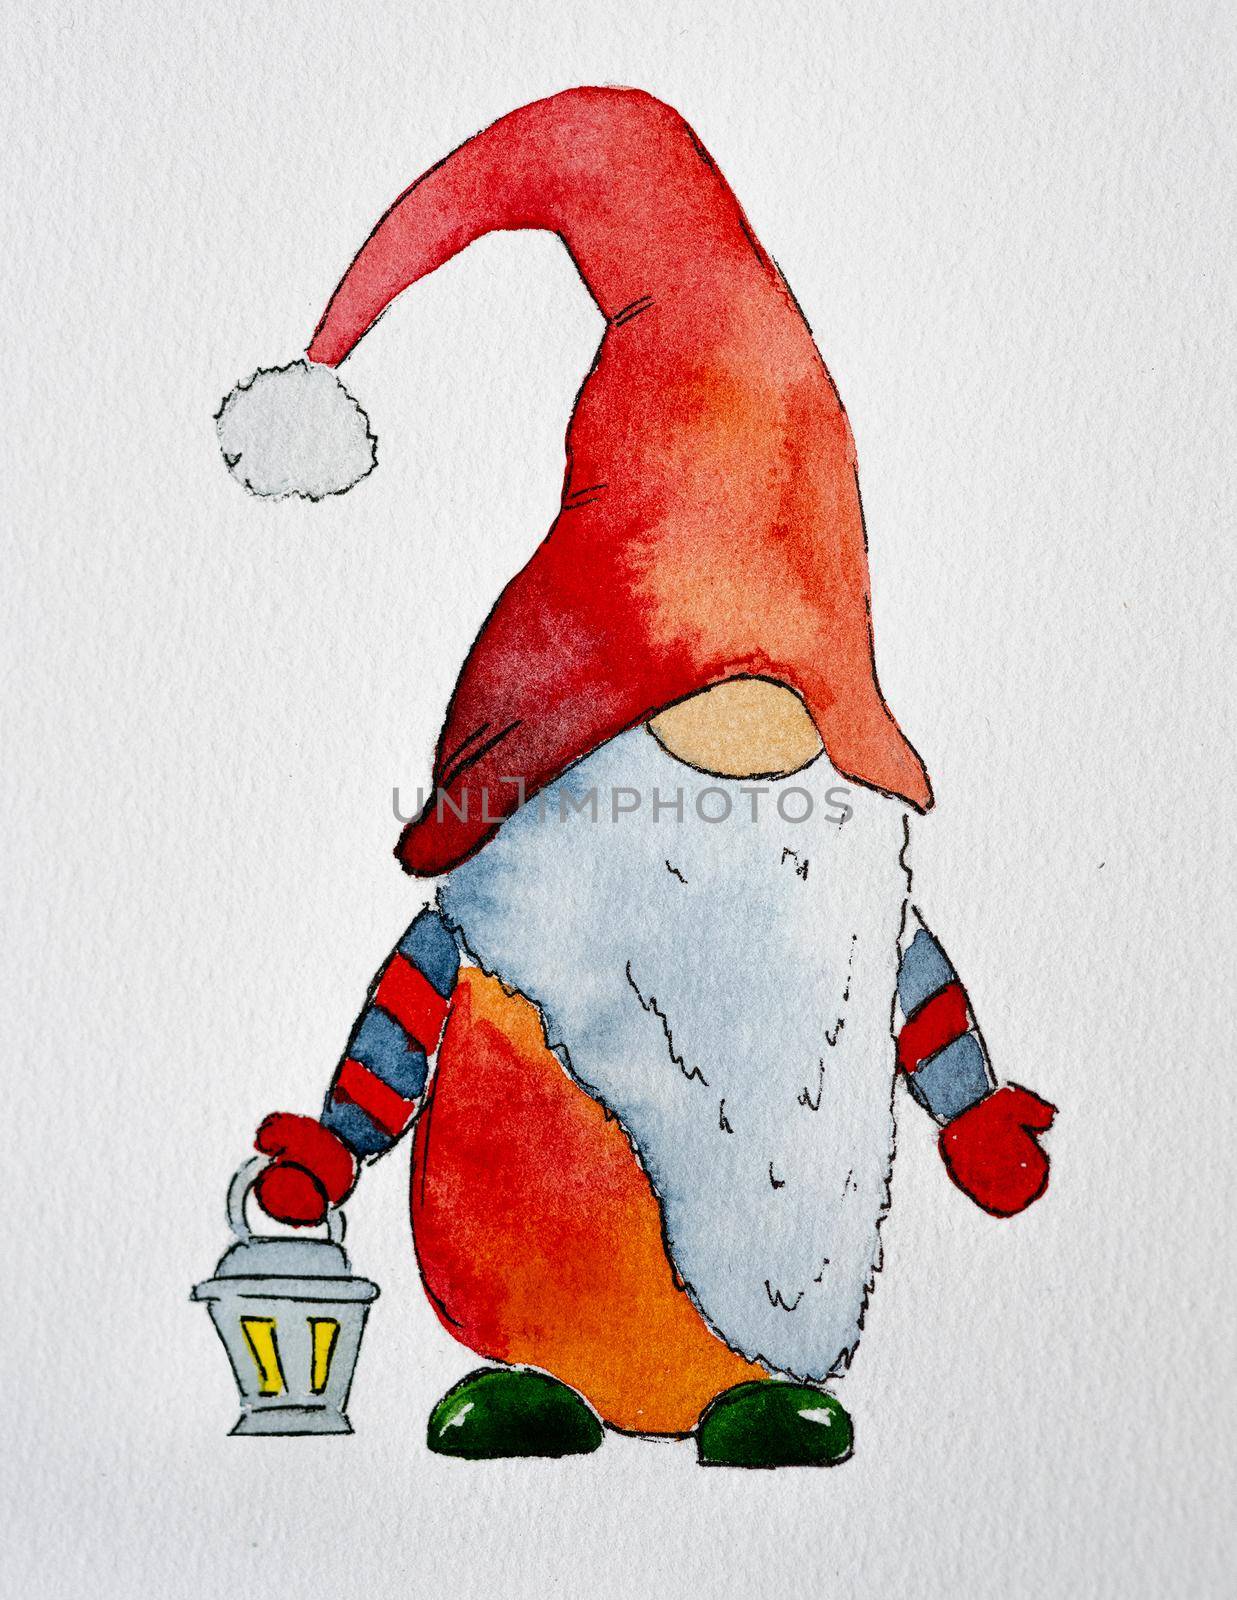 Christmas card with artistic dwarf, Santa Claus helper, holding decoration light painted with watercolor. New Year and Xmas festive art drawn with aquarelle